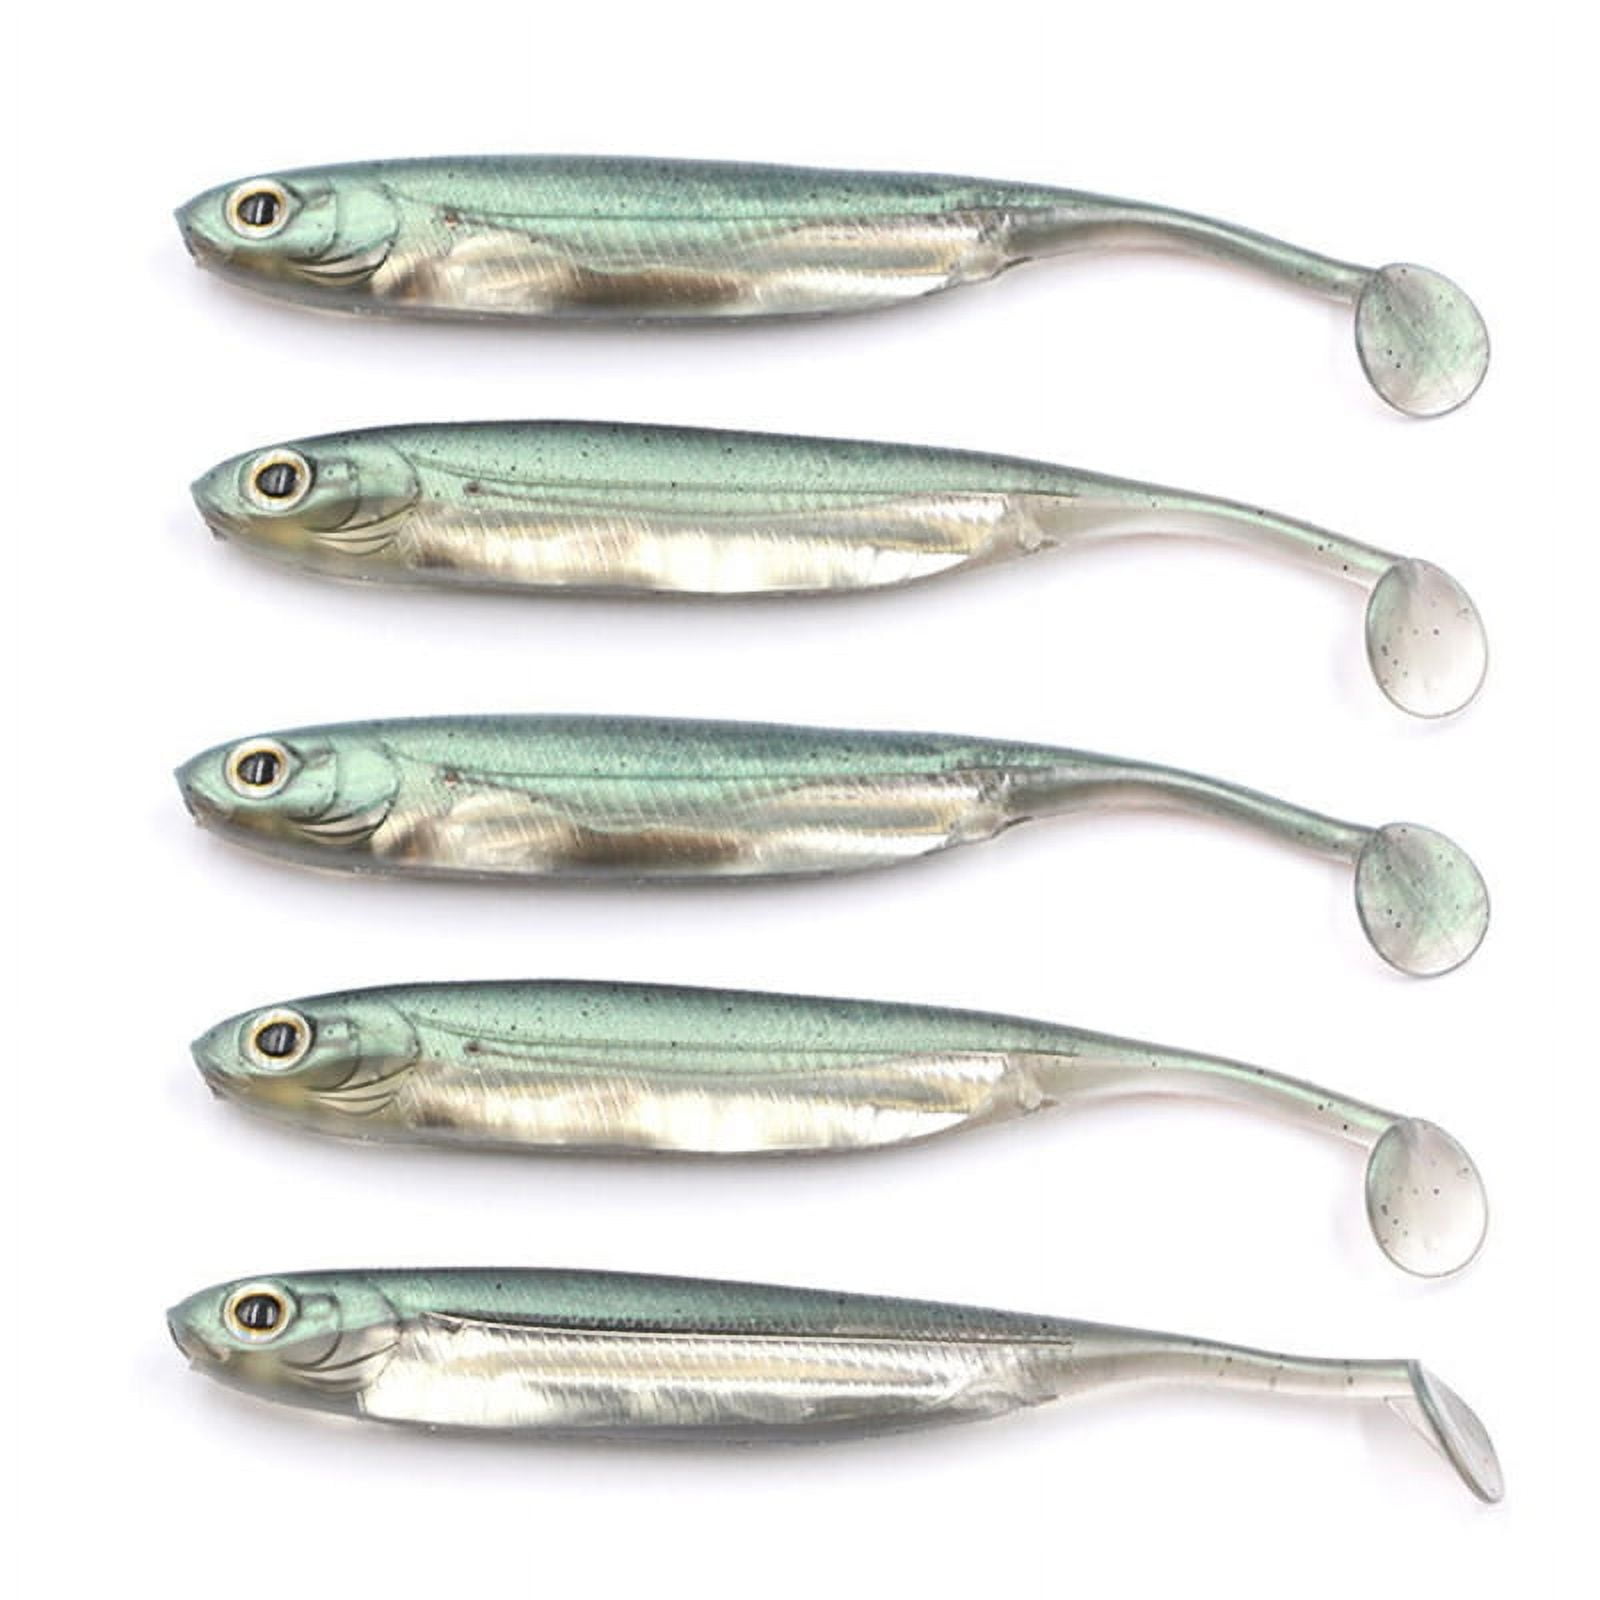 Soft Swimbaits with T-Tail, Fishing Bait for Saltwater & Freshwater